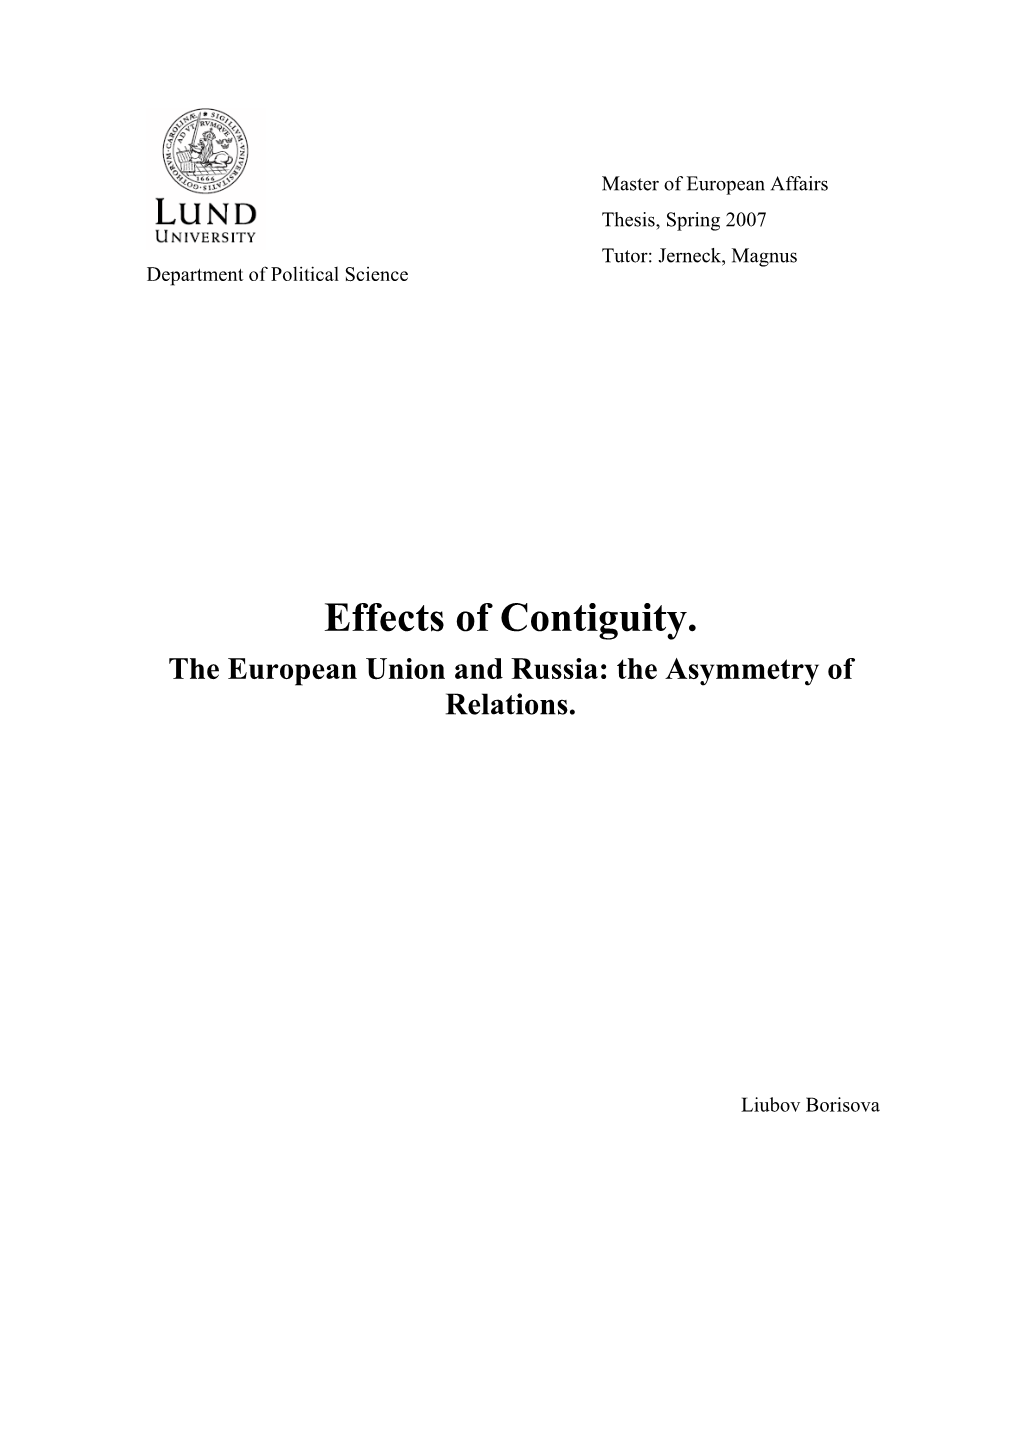 Effects of Contiguity. the European Union and Russia: the Asymmetry of Relations